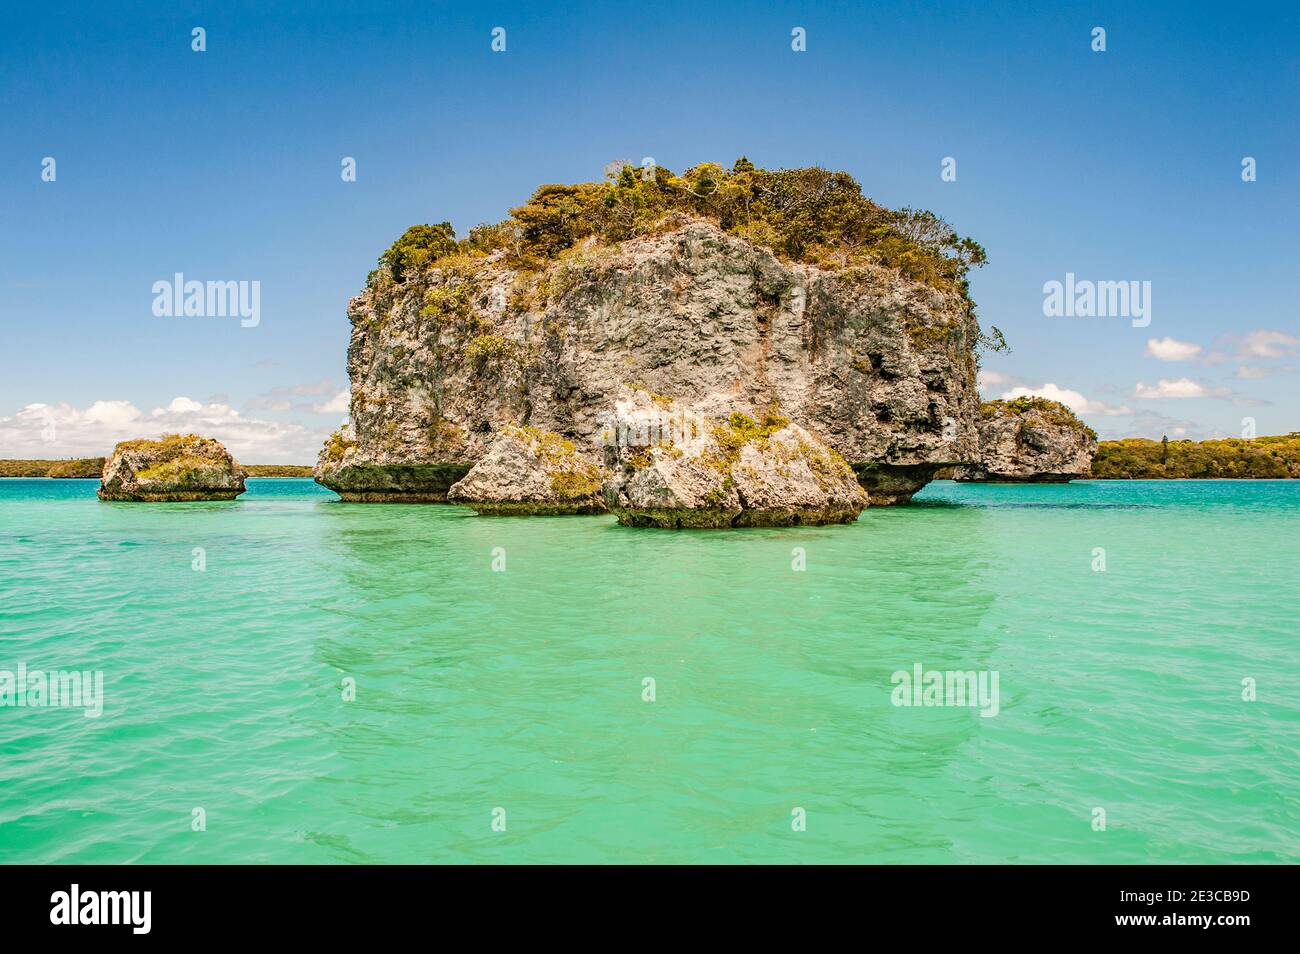 A rocky isle of the turquoise waters of the Baie d'Upi at the Île des Pins, New Caledonia Stock Photo